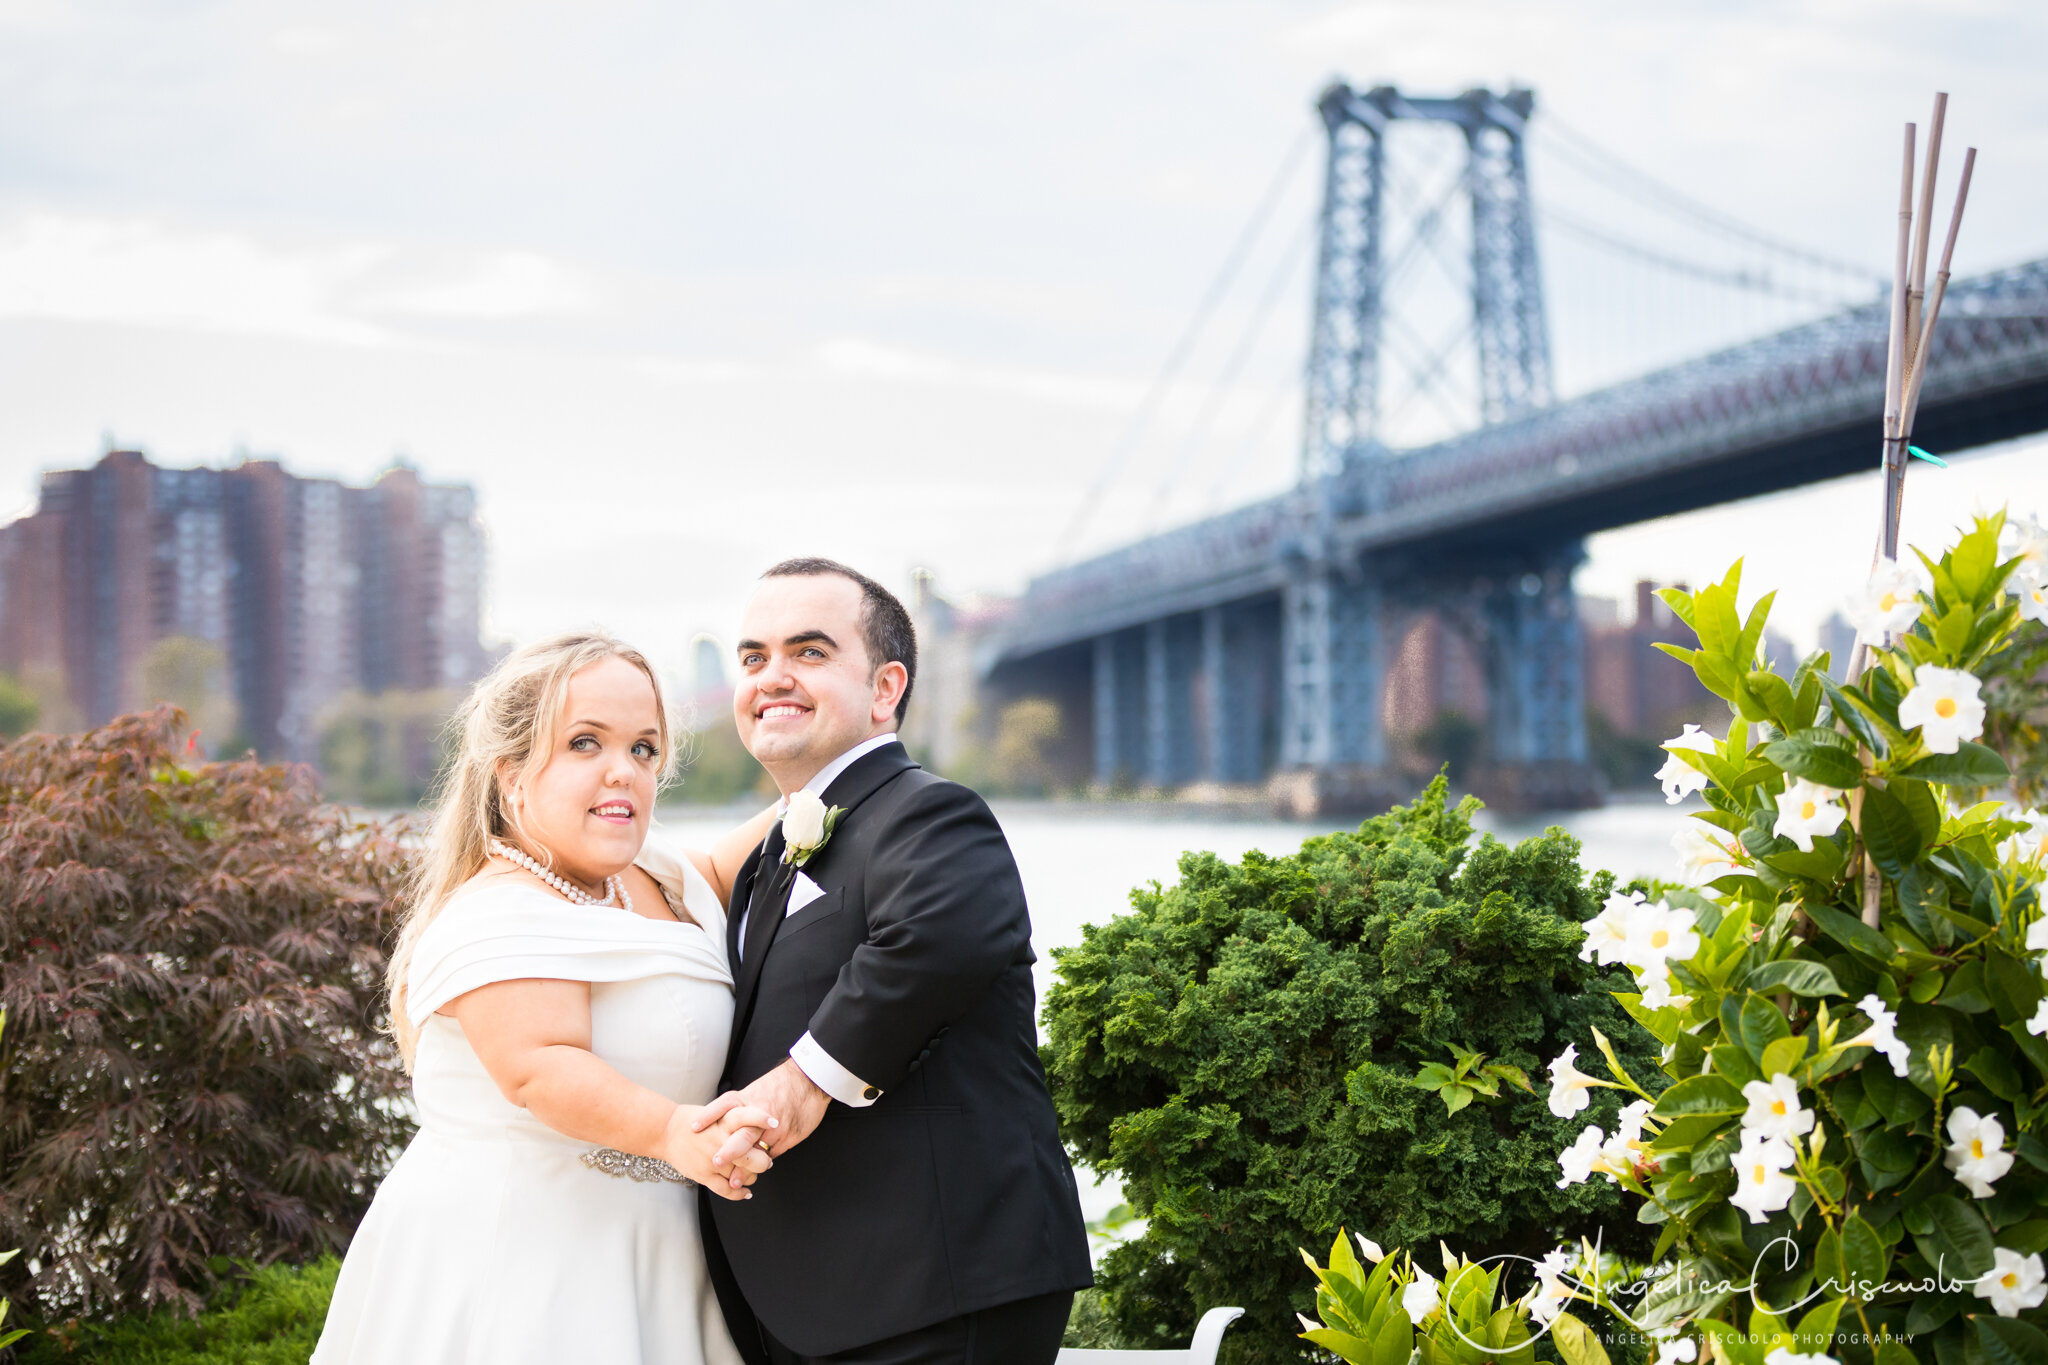 Giando on the Water Brooklyn Wedding Photography by Angelica Criscuolo